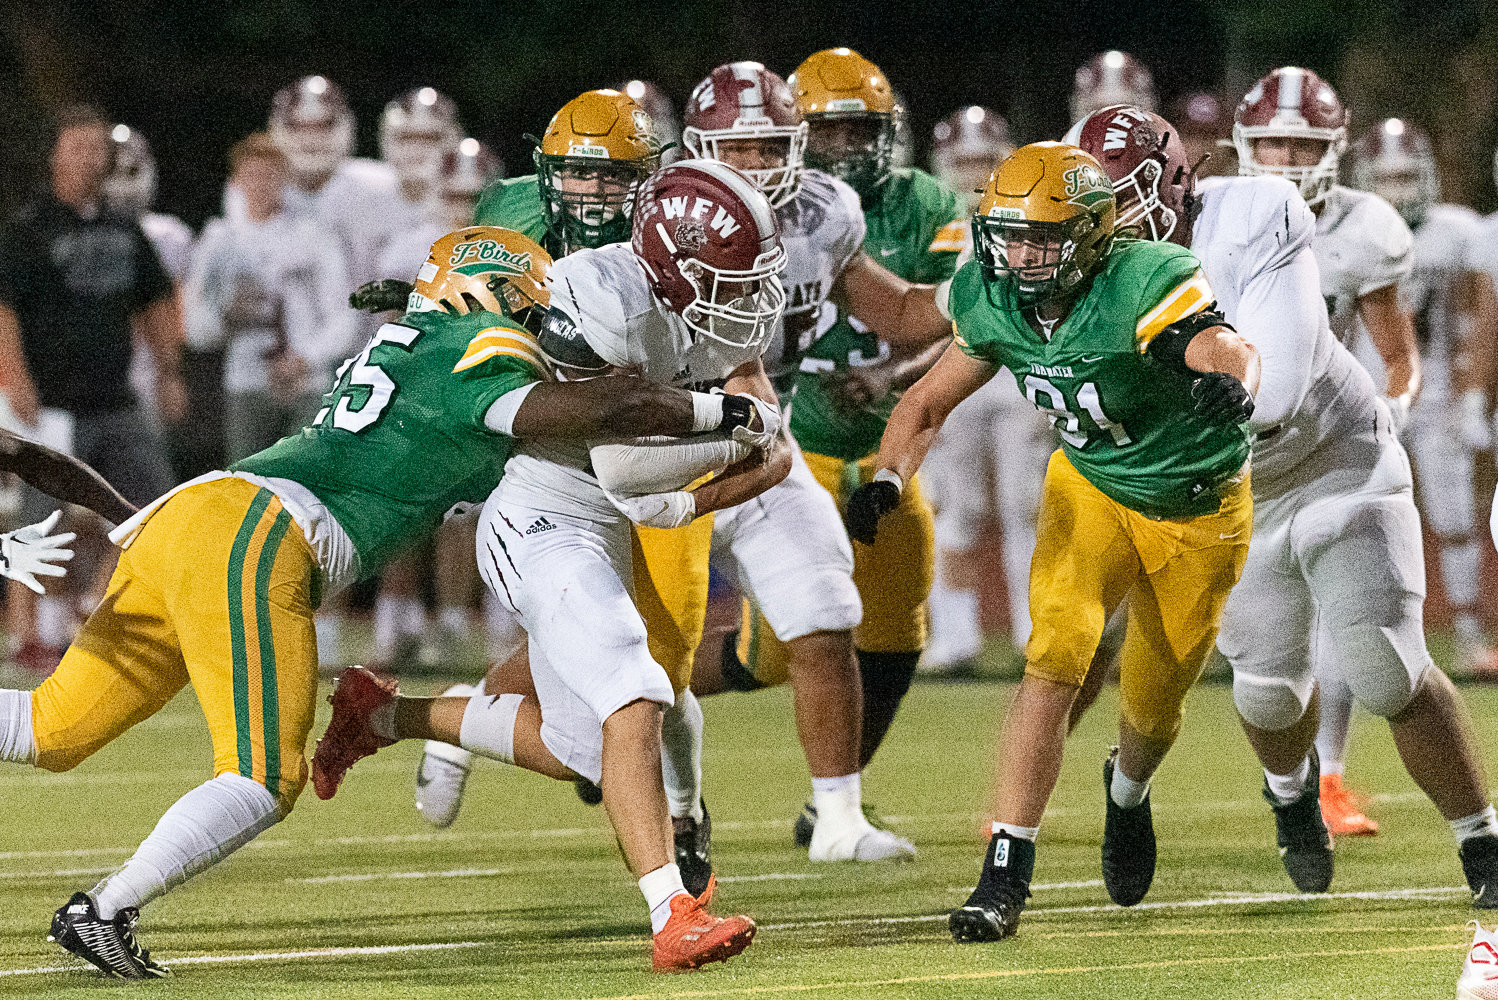 Evan Stajduhar runs through a field of Thunderbirds during the first half of W.F. West's 28-7 win over Tumwater at Tumwater District Stadium on Sept. 30.